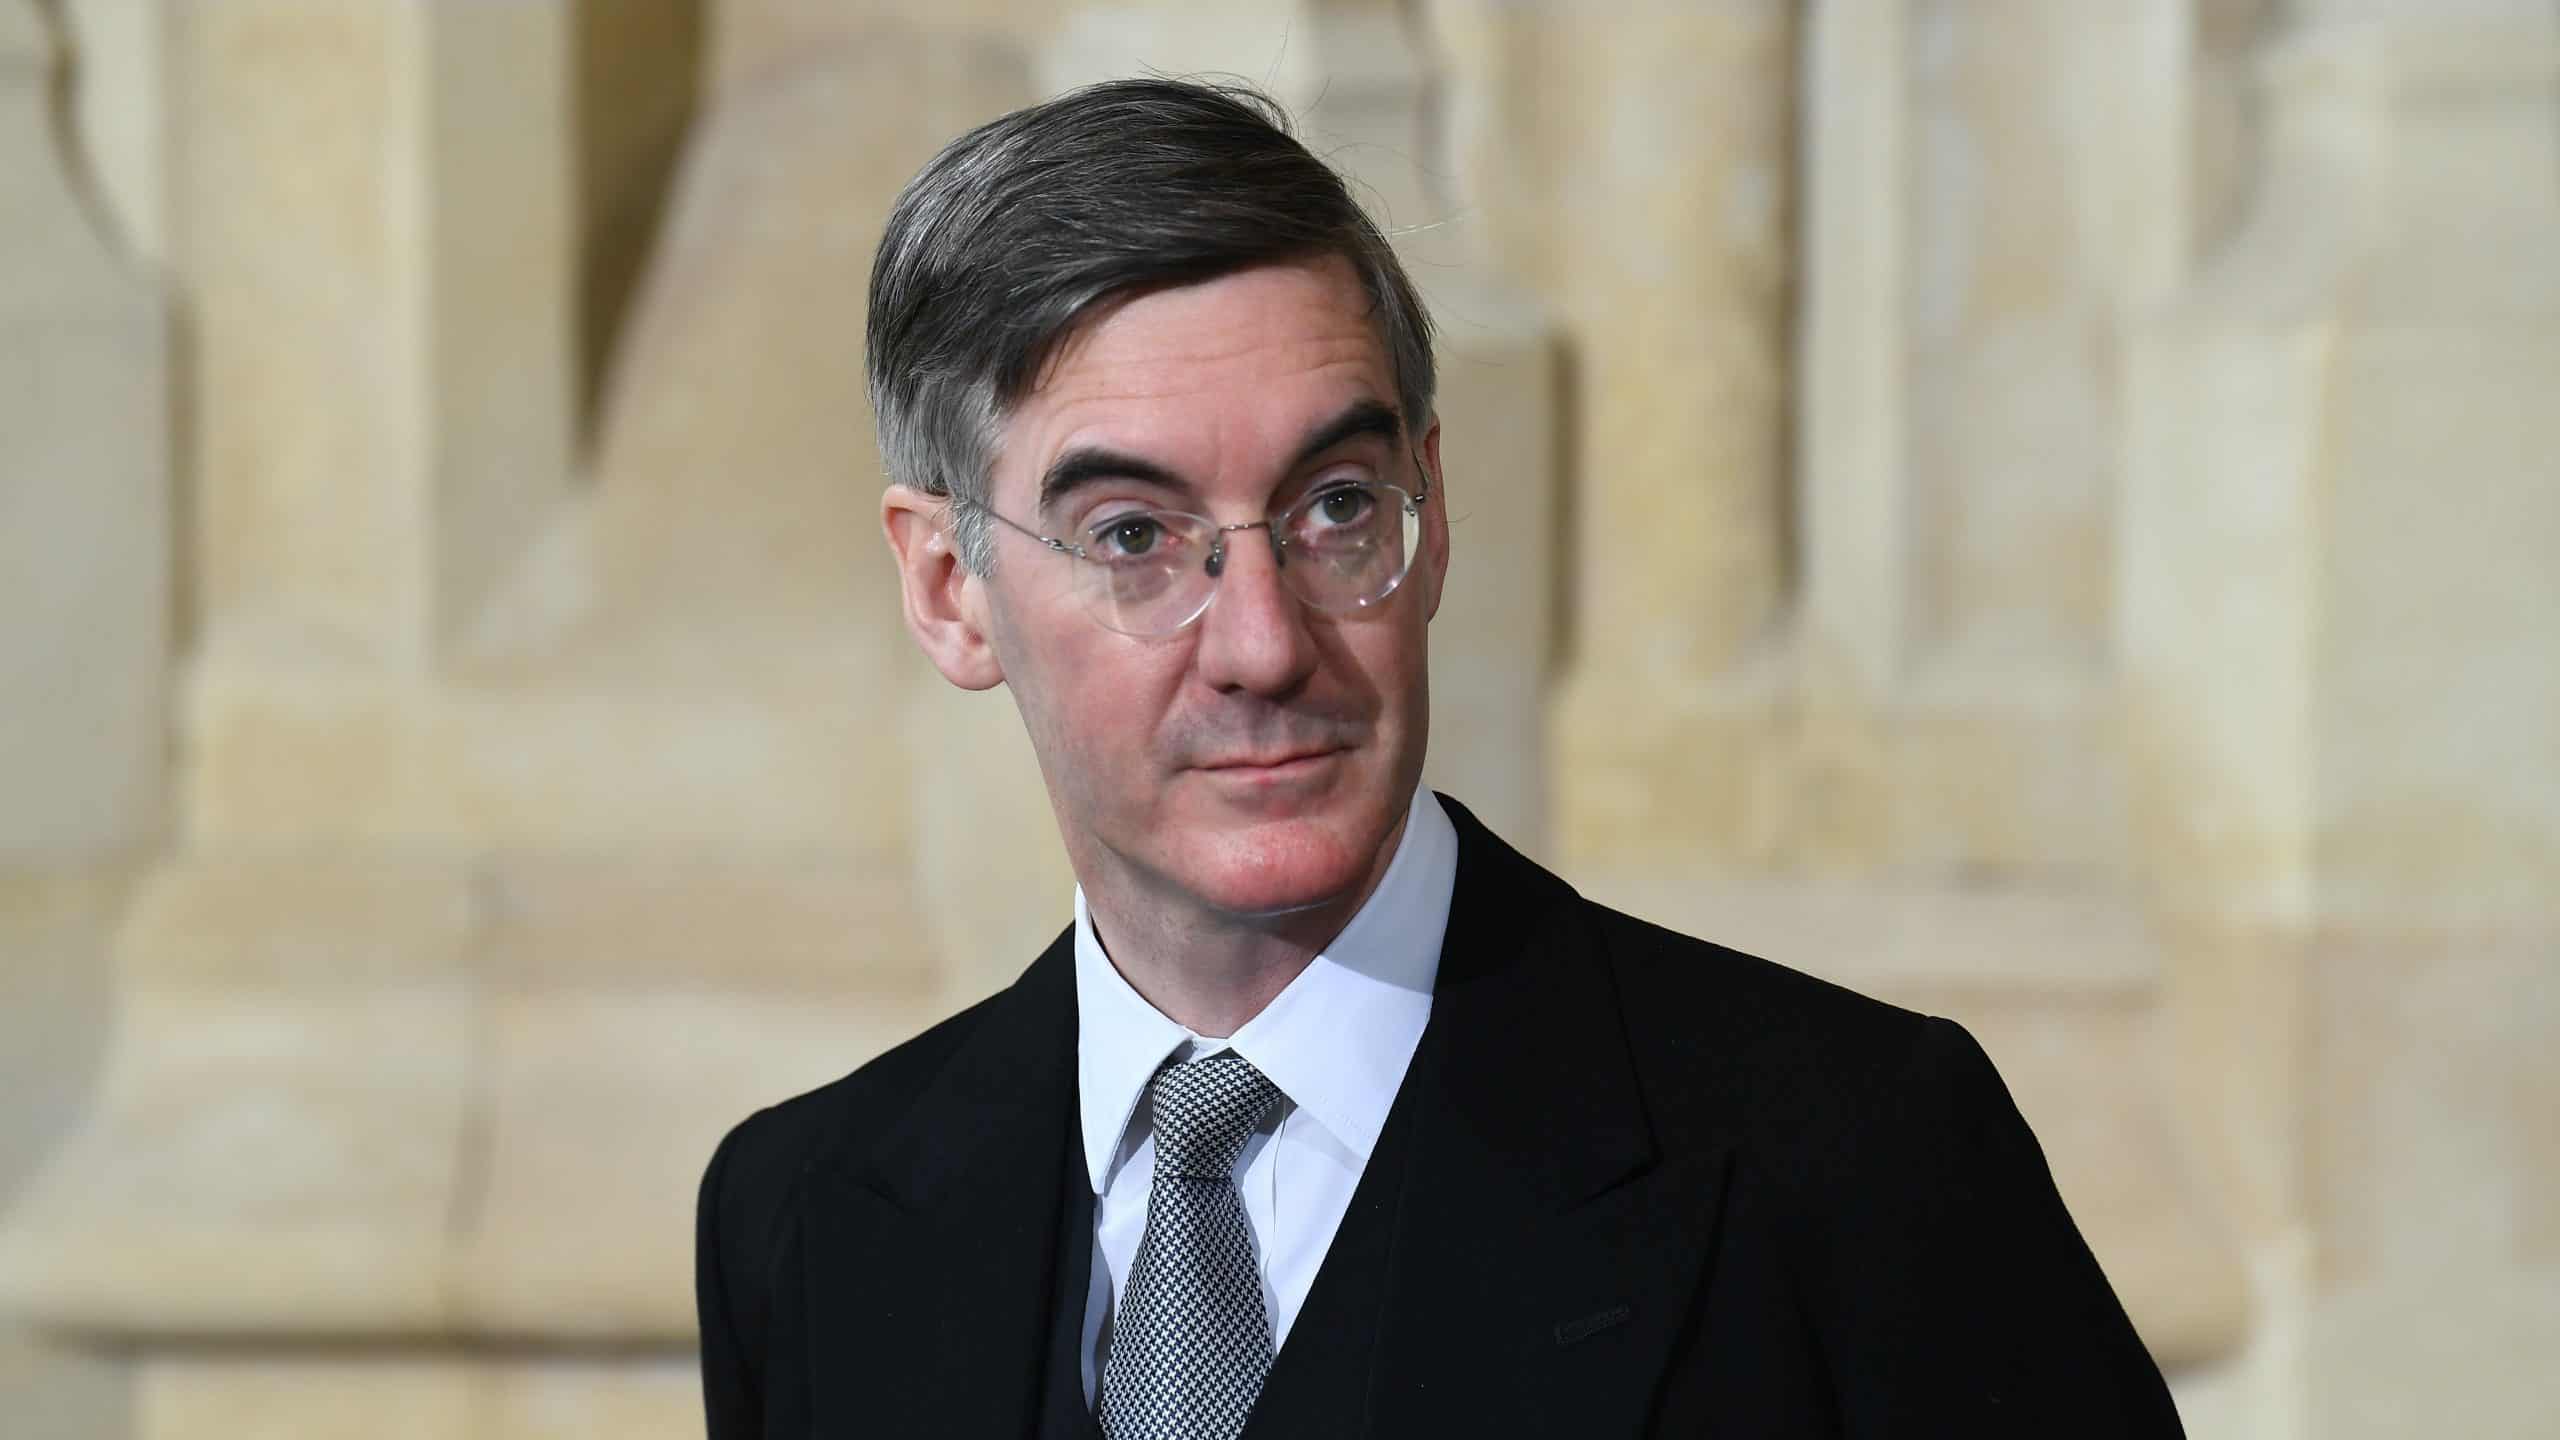 Jacob Rees-Mogg in line for £800k payday after fund advertises “super normal returns” during pandemic